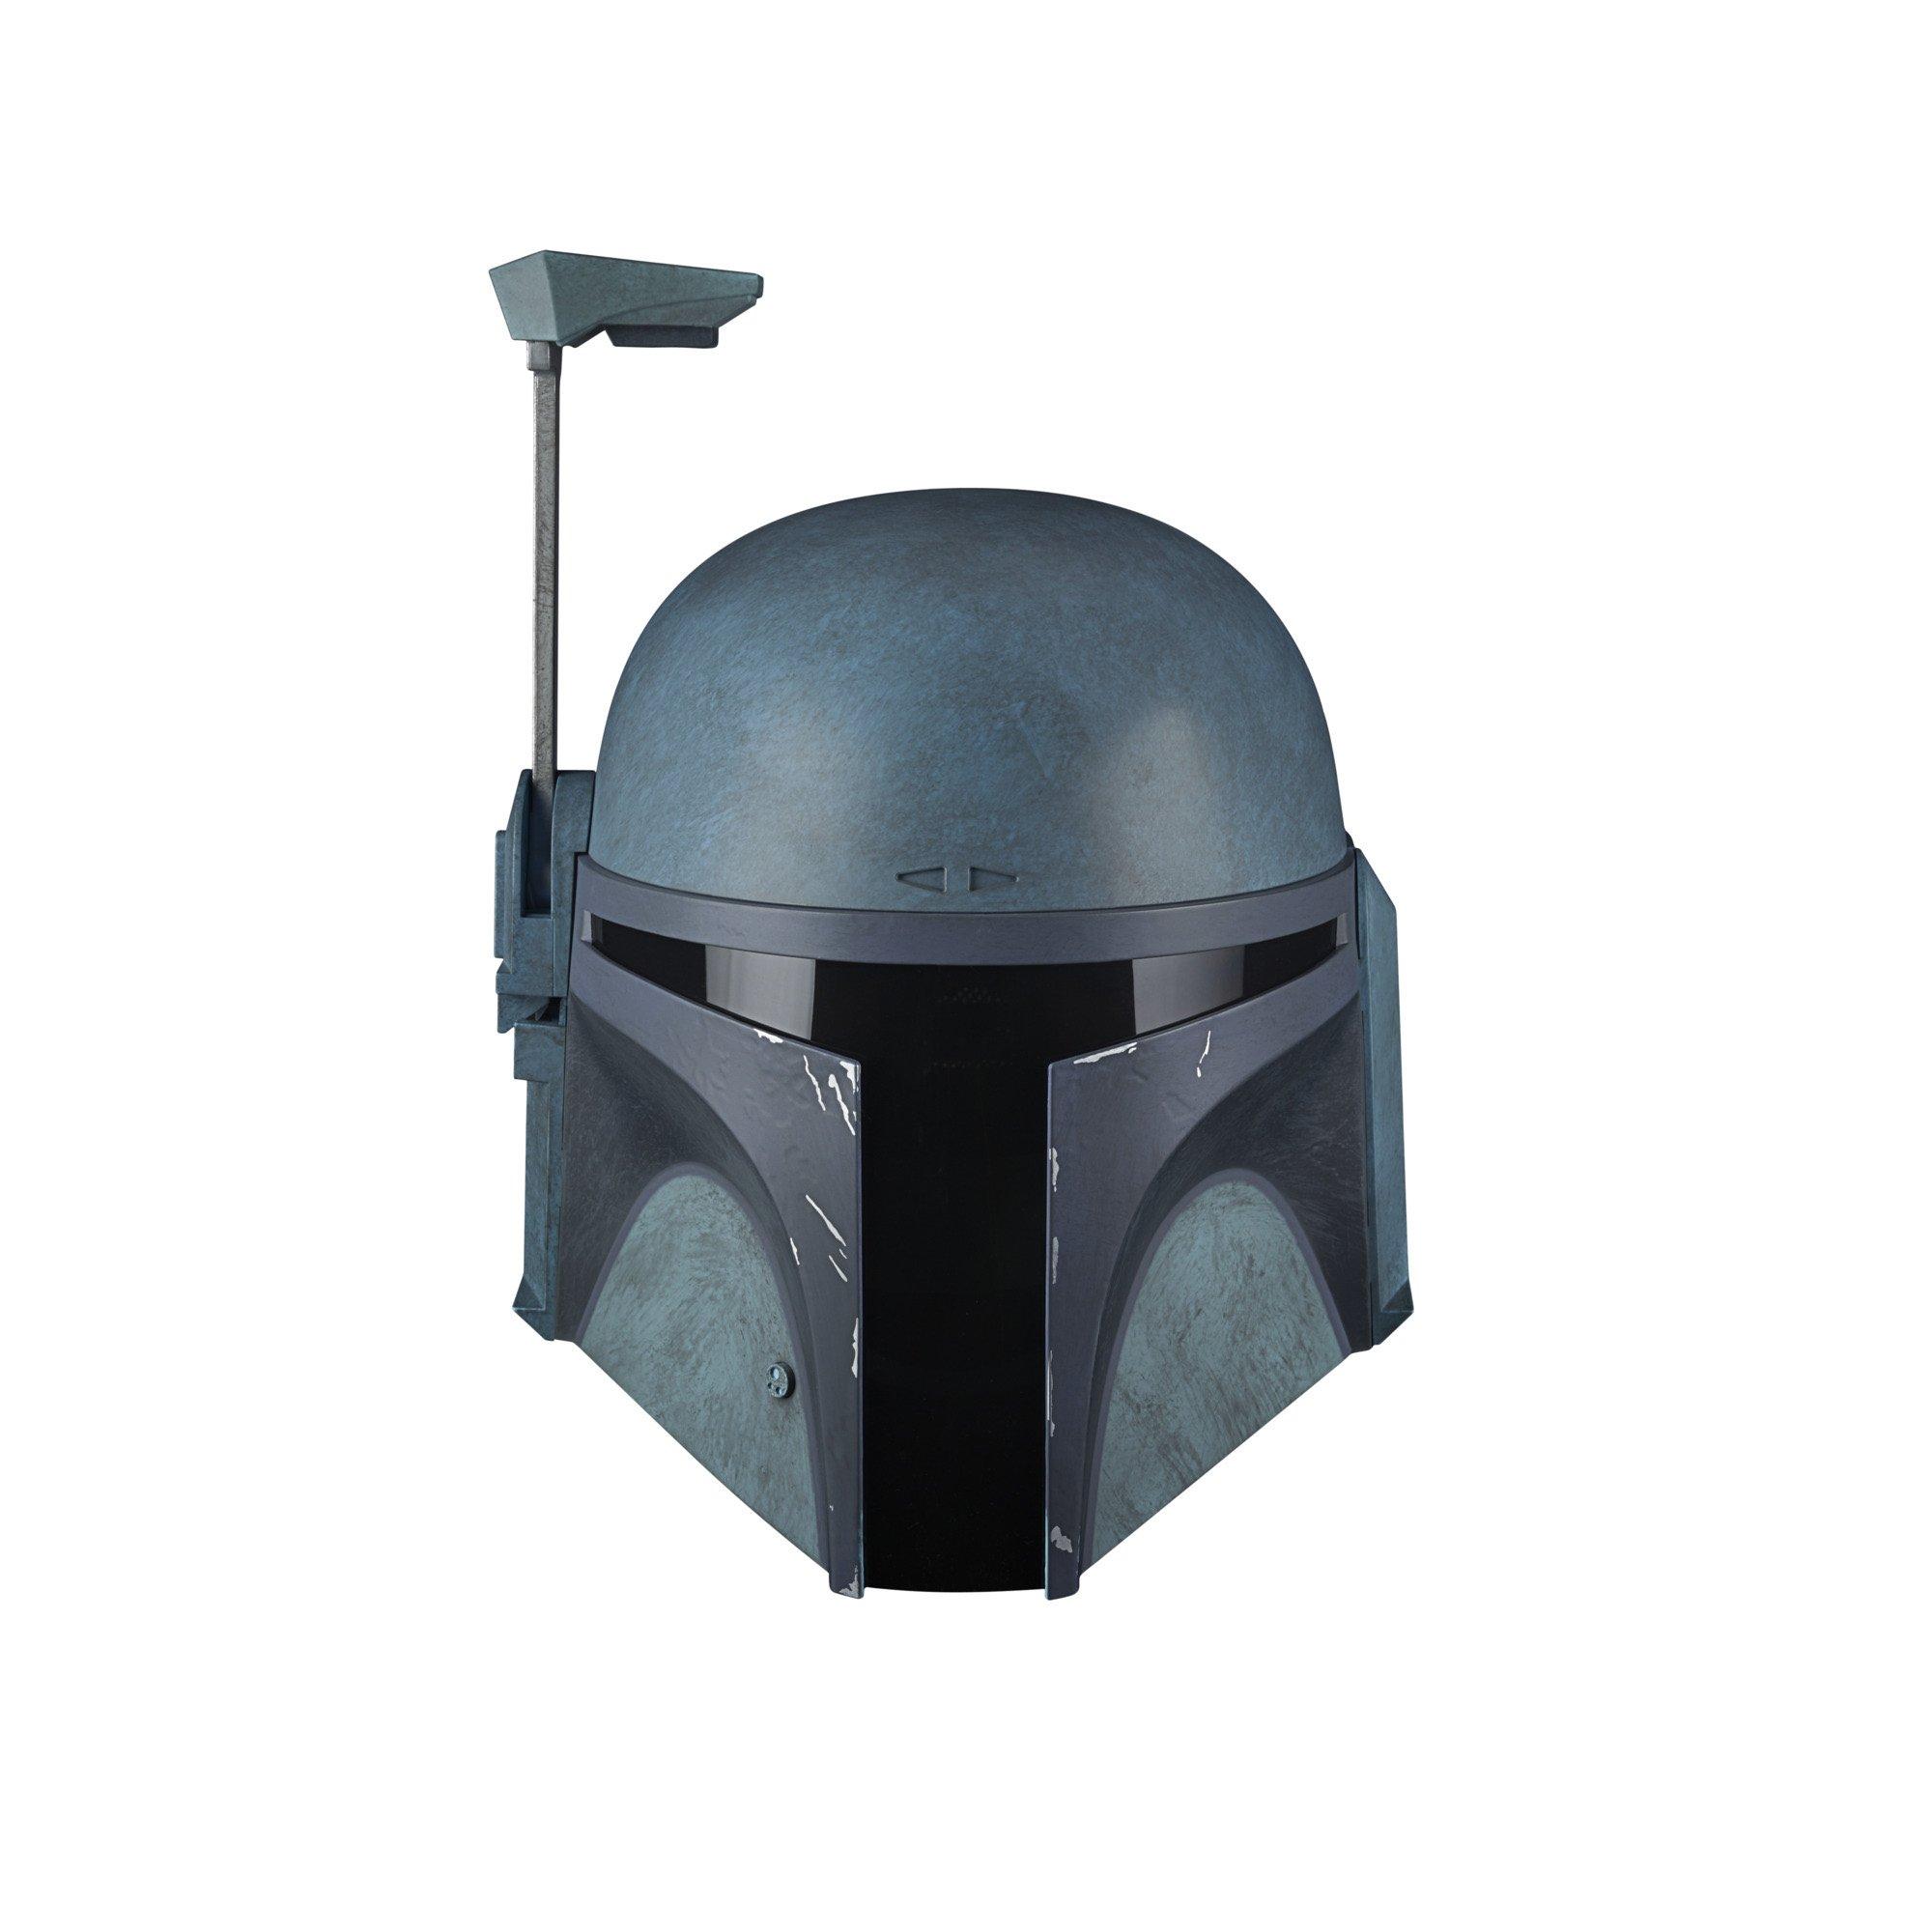  STAR WARS The Black Series The Mandalorian Premium Electronic  Helmet Roleplay Collectible, Toys for Kids Ages 14 and Up : Toys & Games